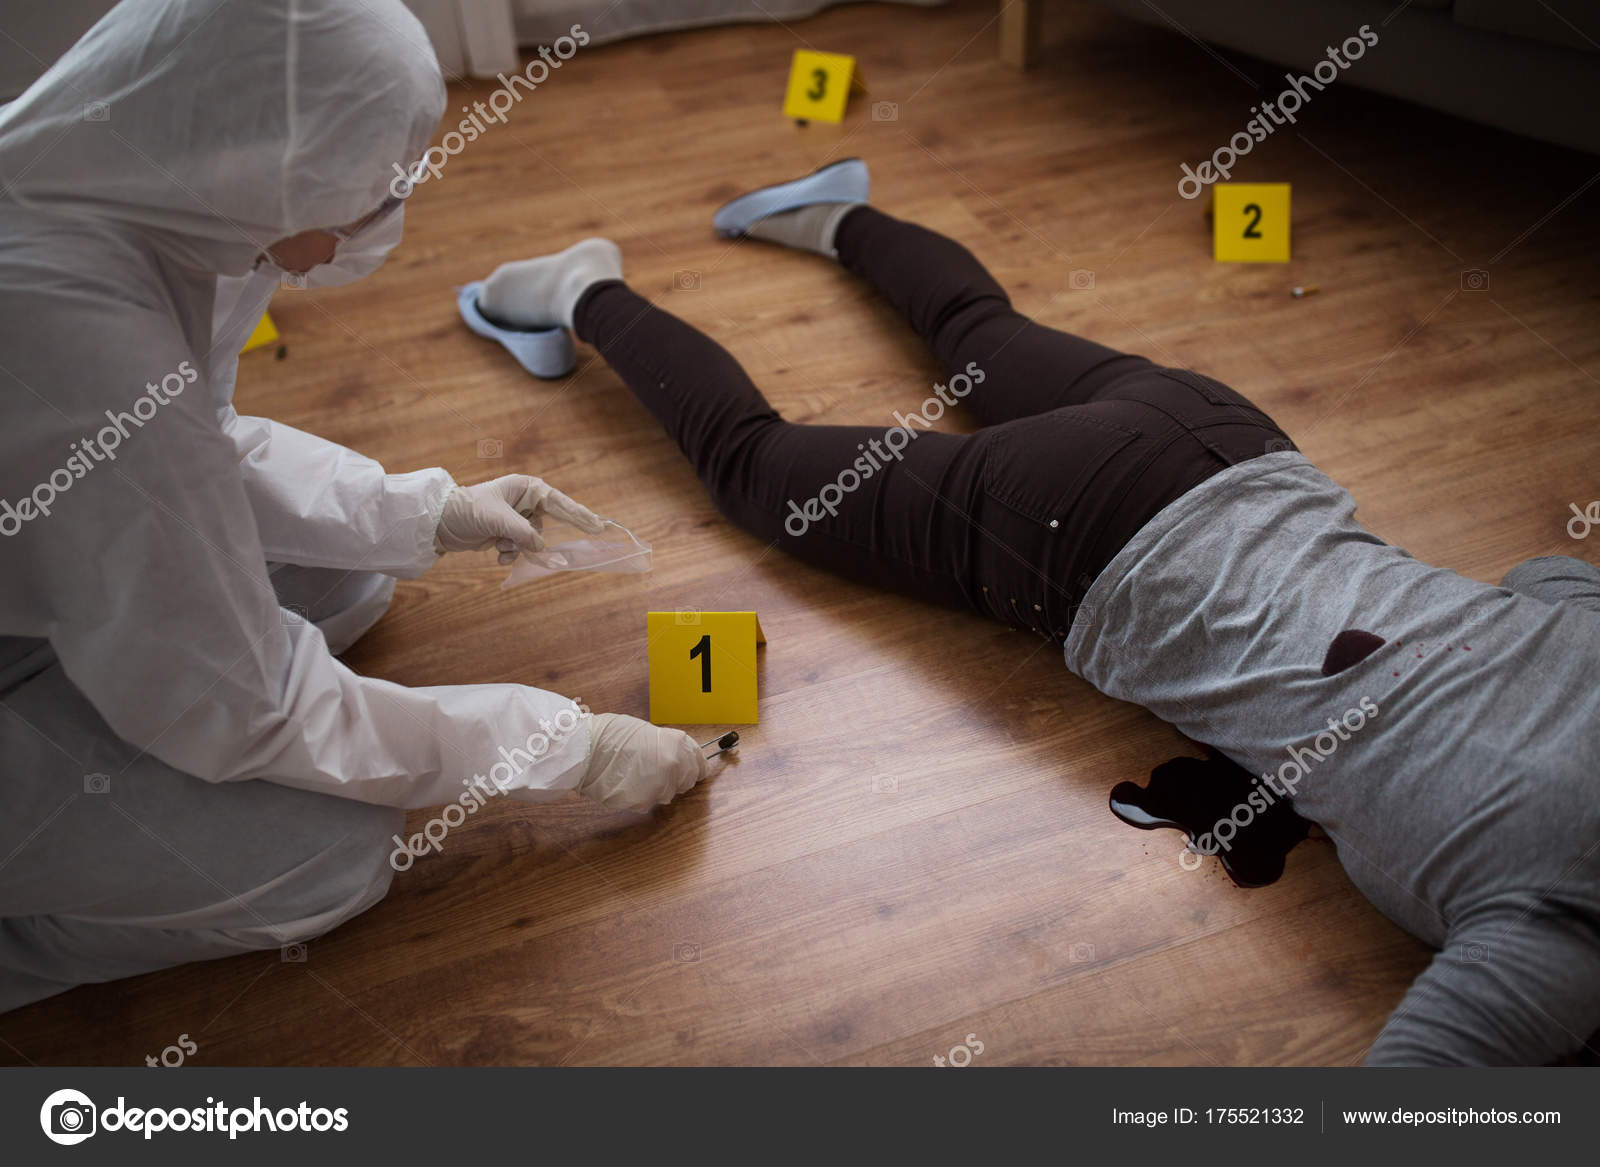 Collecting Footprints At A Crime Scene